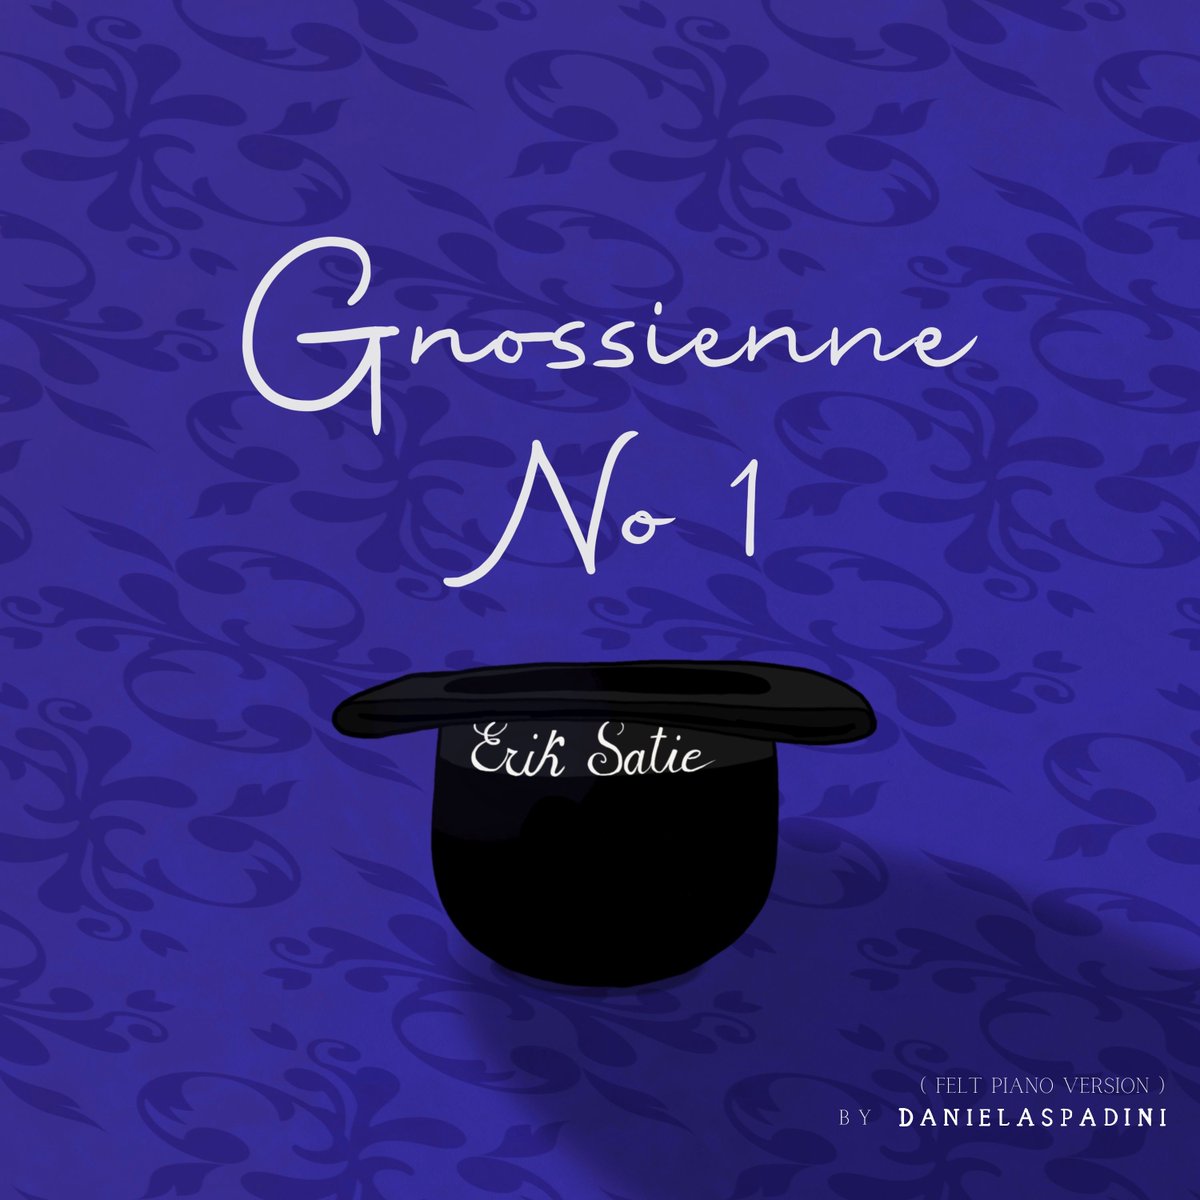 hypeddit.com/danielaspadini… Link to the pre-save for this classical piece! I look forward to seeing many of you🥰 #eriksatie #gnossienne